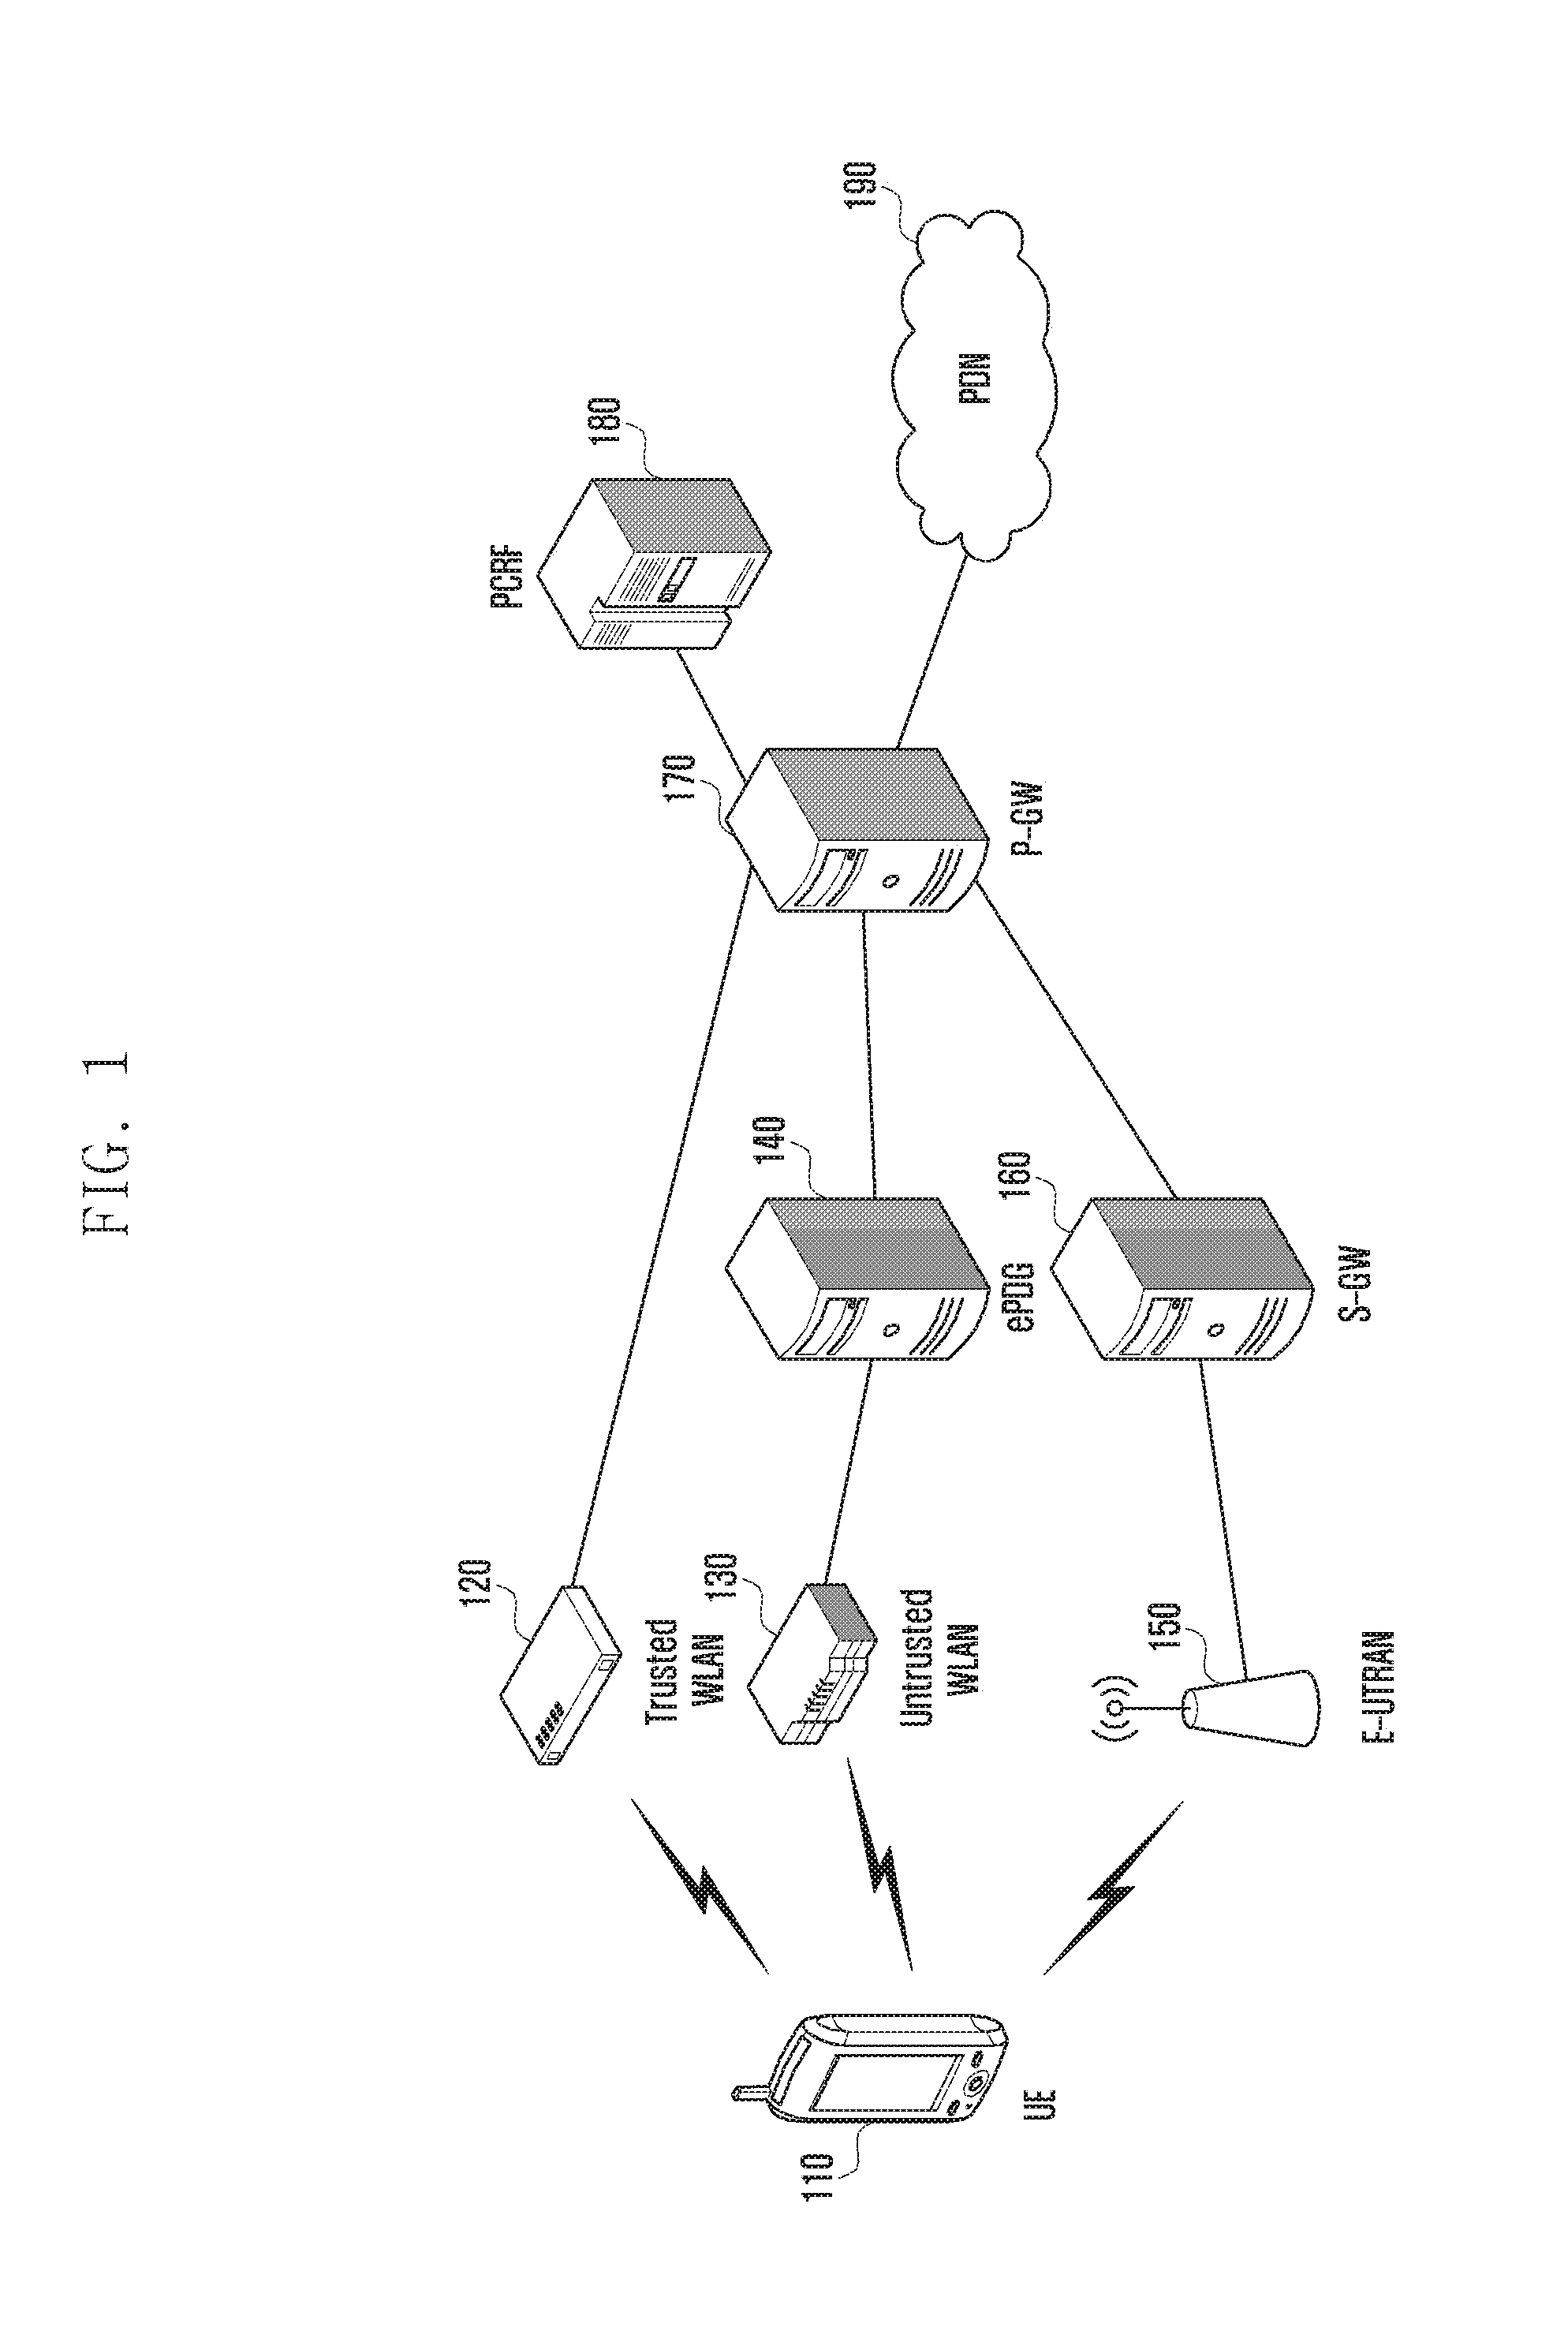 Method and device for controlling data traffic during access to wireless LAN and cellular network